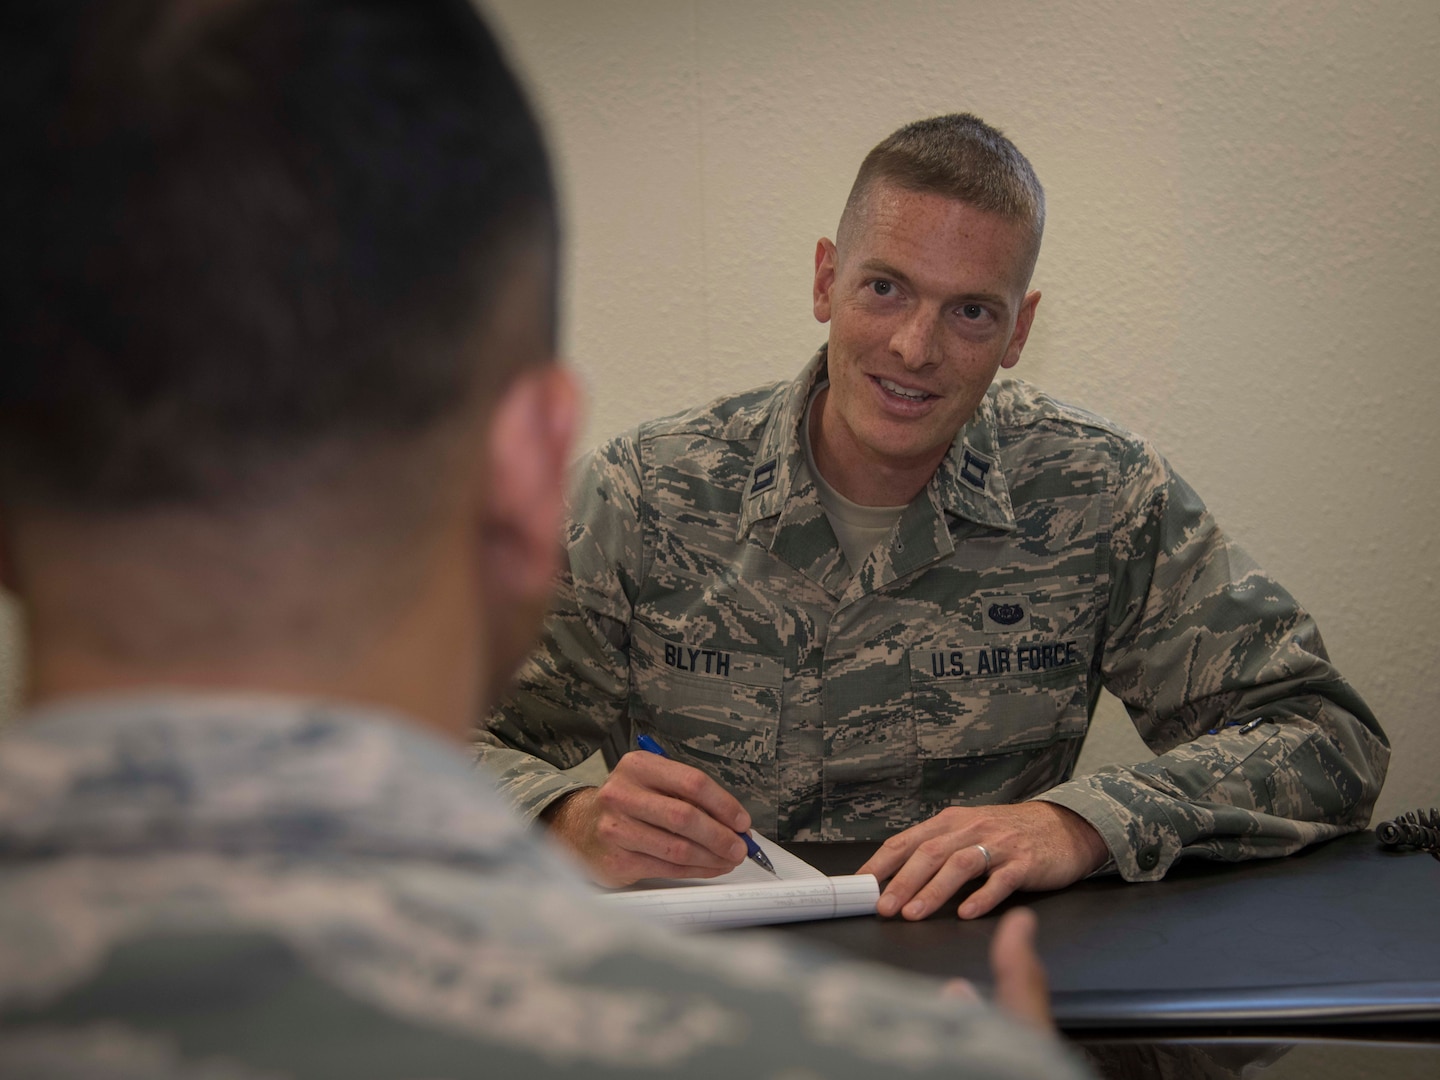 Capt. Matthew Blyth, a Defense Attorney with the Air Force Legal Operations Agency/Area Defense Council assists a troubled Airman July 10, 2019 at the Joint Base San Antonio-Randolph ADC. The ADC is a full-spectrum resource, implemented in 1974, to help Airmen through the lowest level paperwork, such as a letter of counseling or a letter of reprimand, up to the most serious court martial cases. (U.S. Air Force photo by: Airman 1st Class Shelby Pruitt)